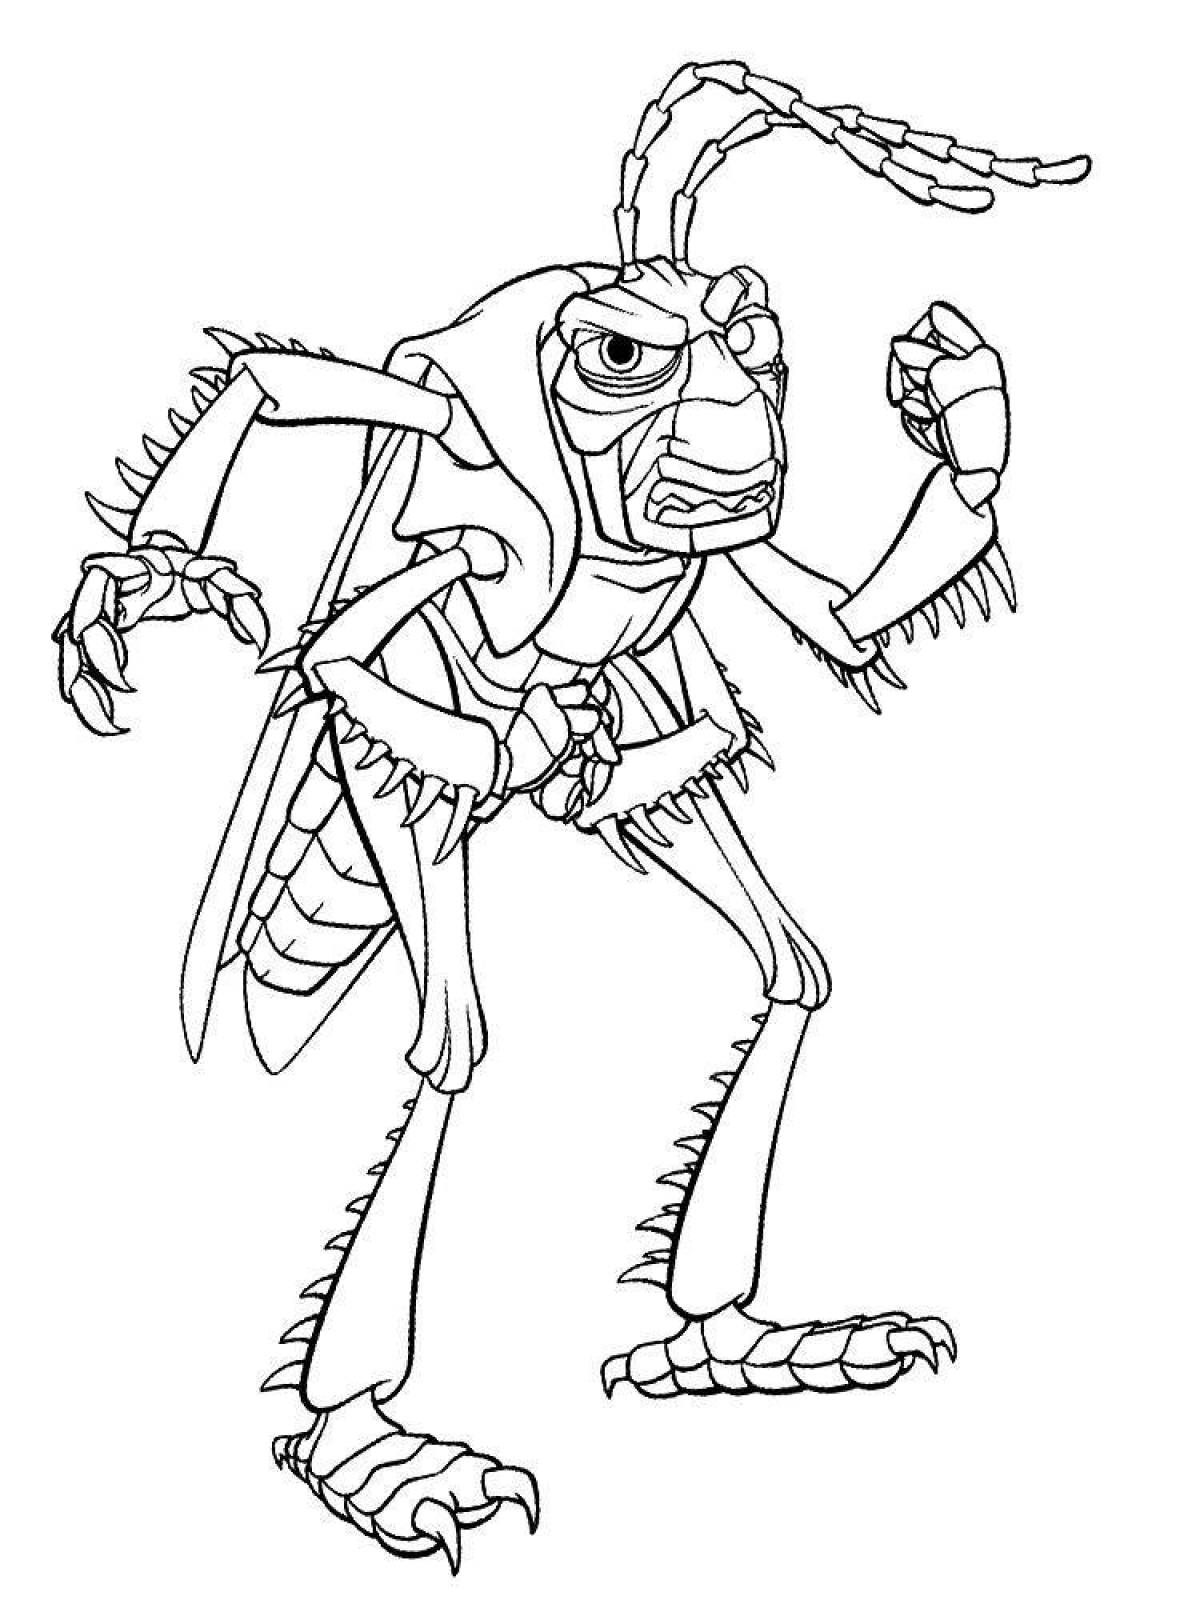 Coloring page spectacular amogus